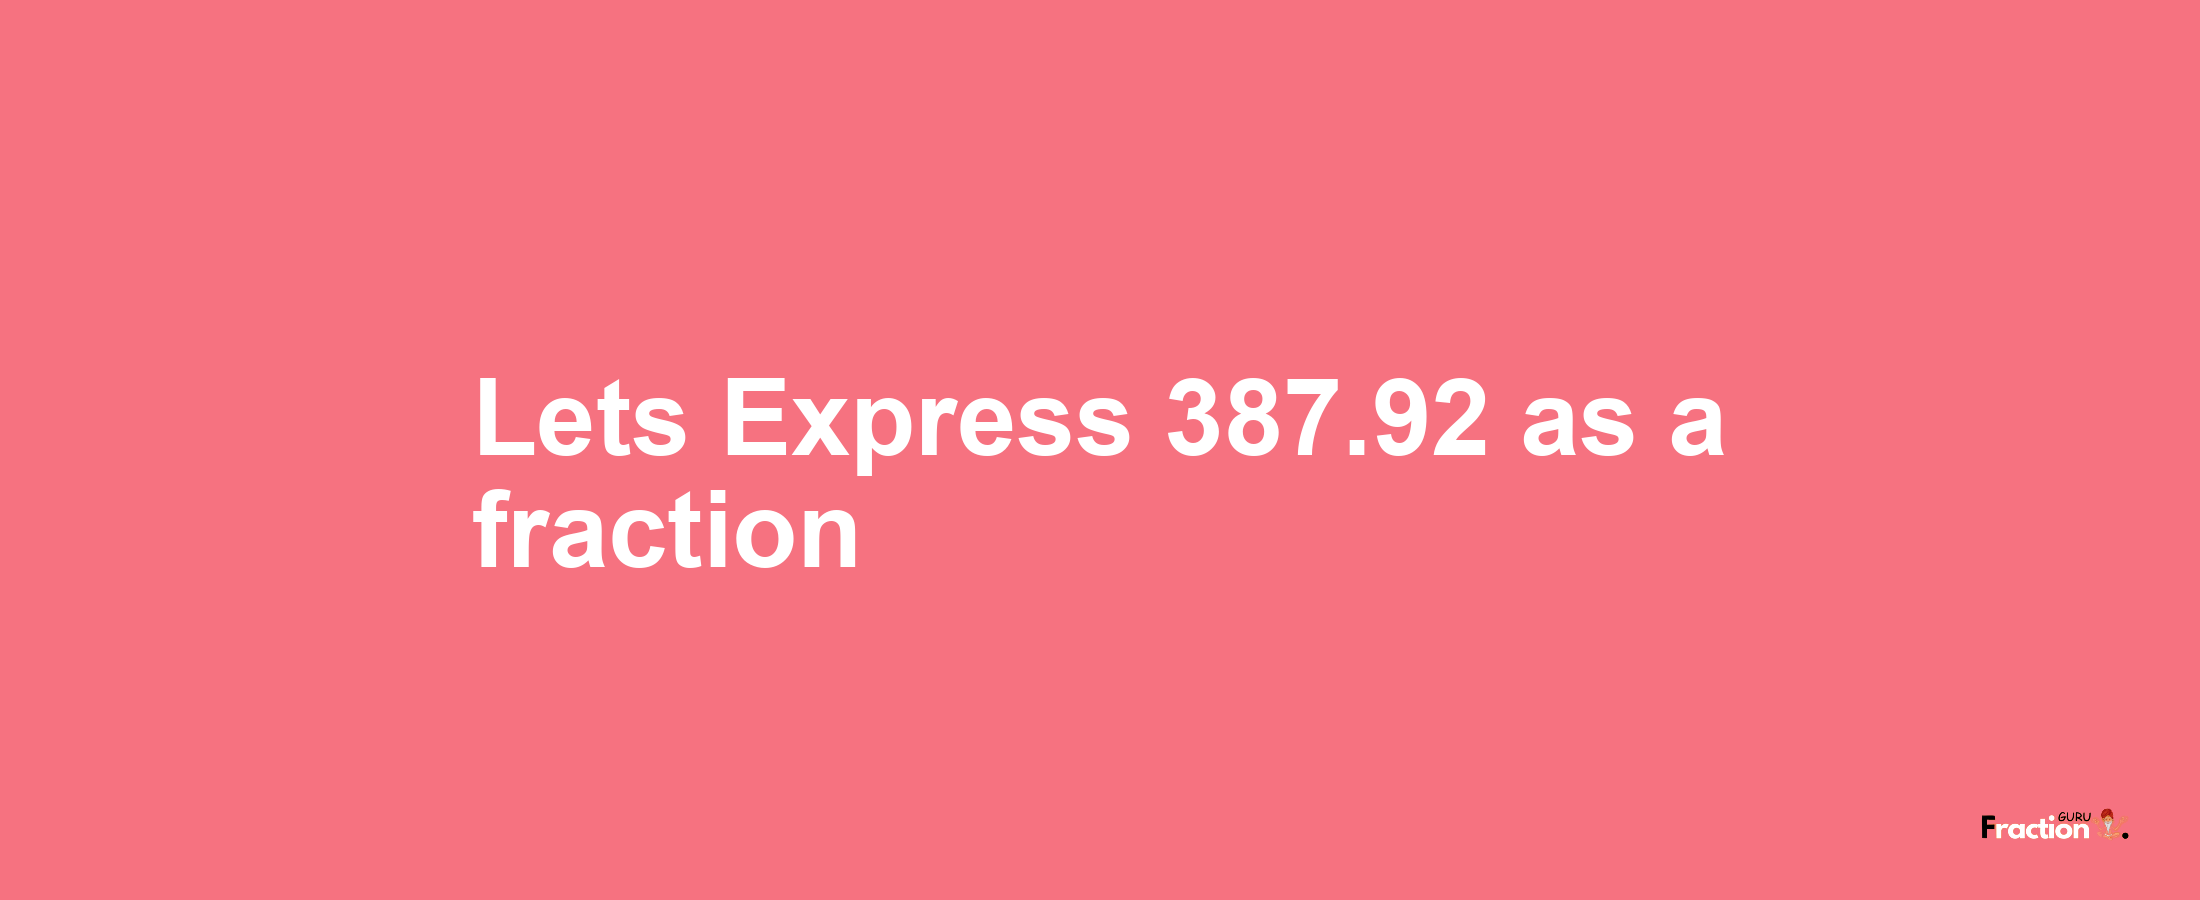 Lets Express 387.92 as afraction